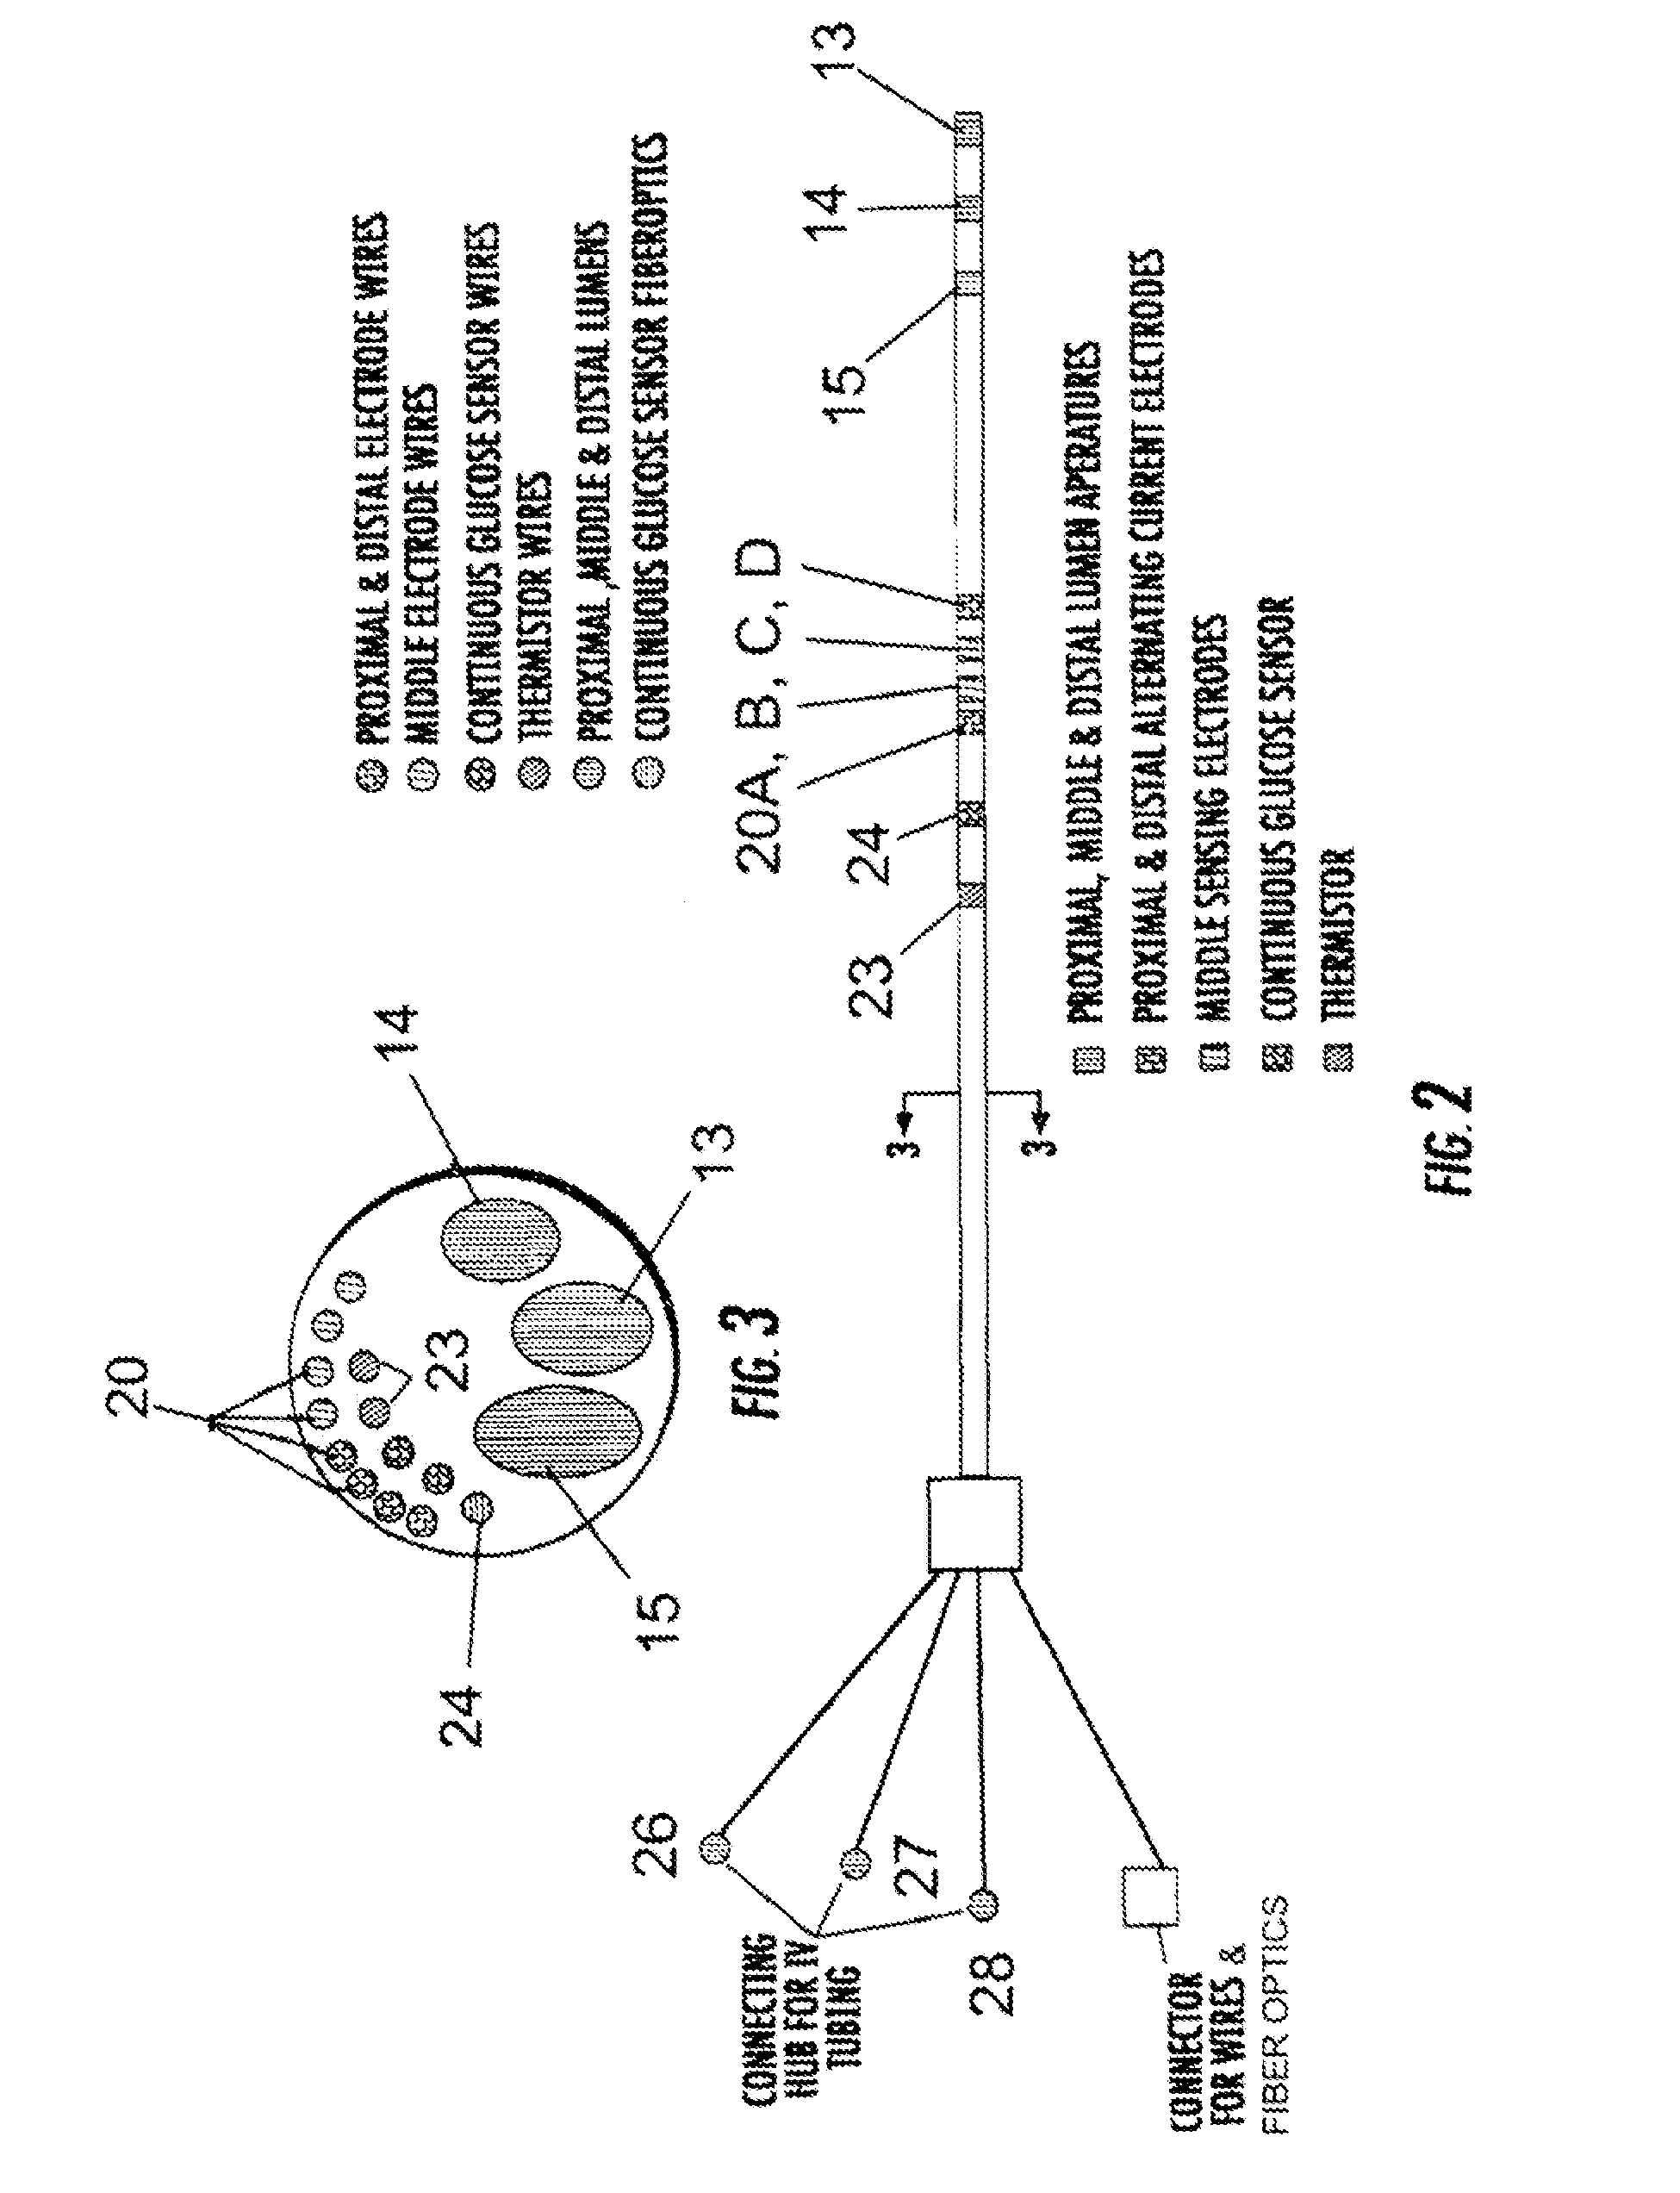 Computerized System for Blood Chemistry Monitoring